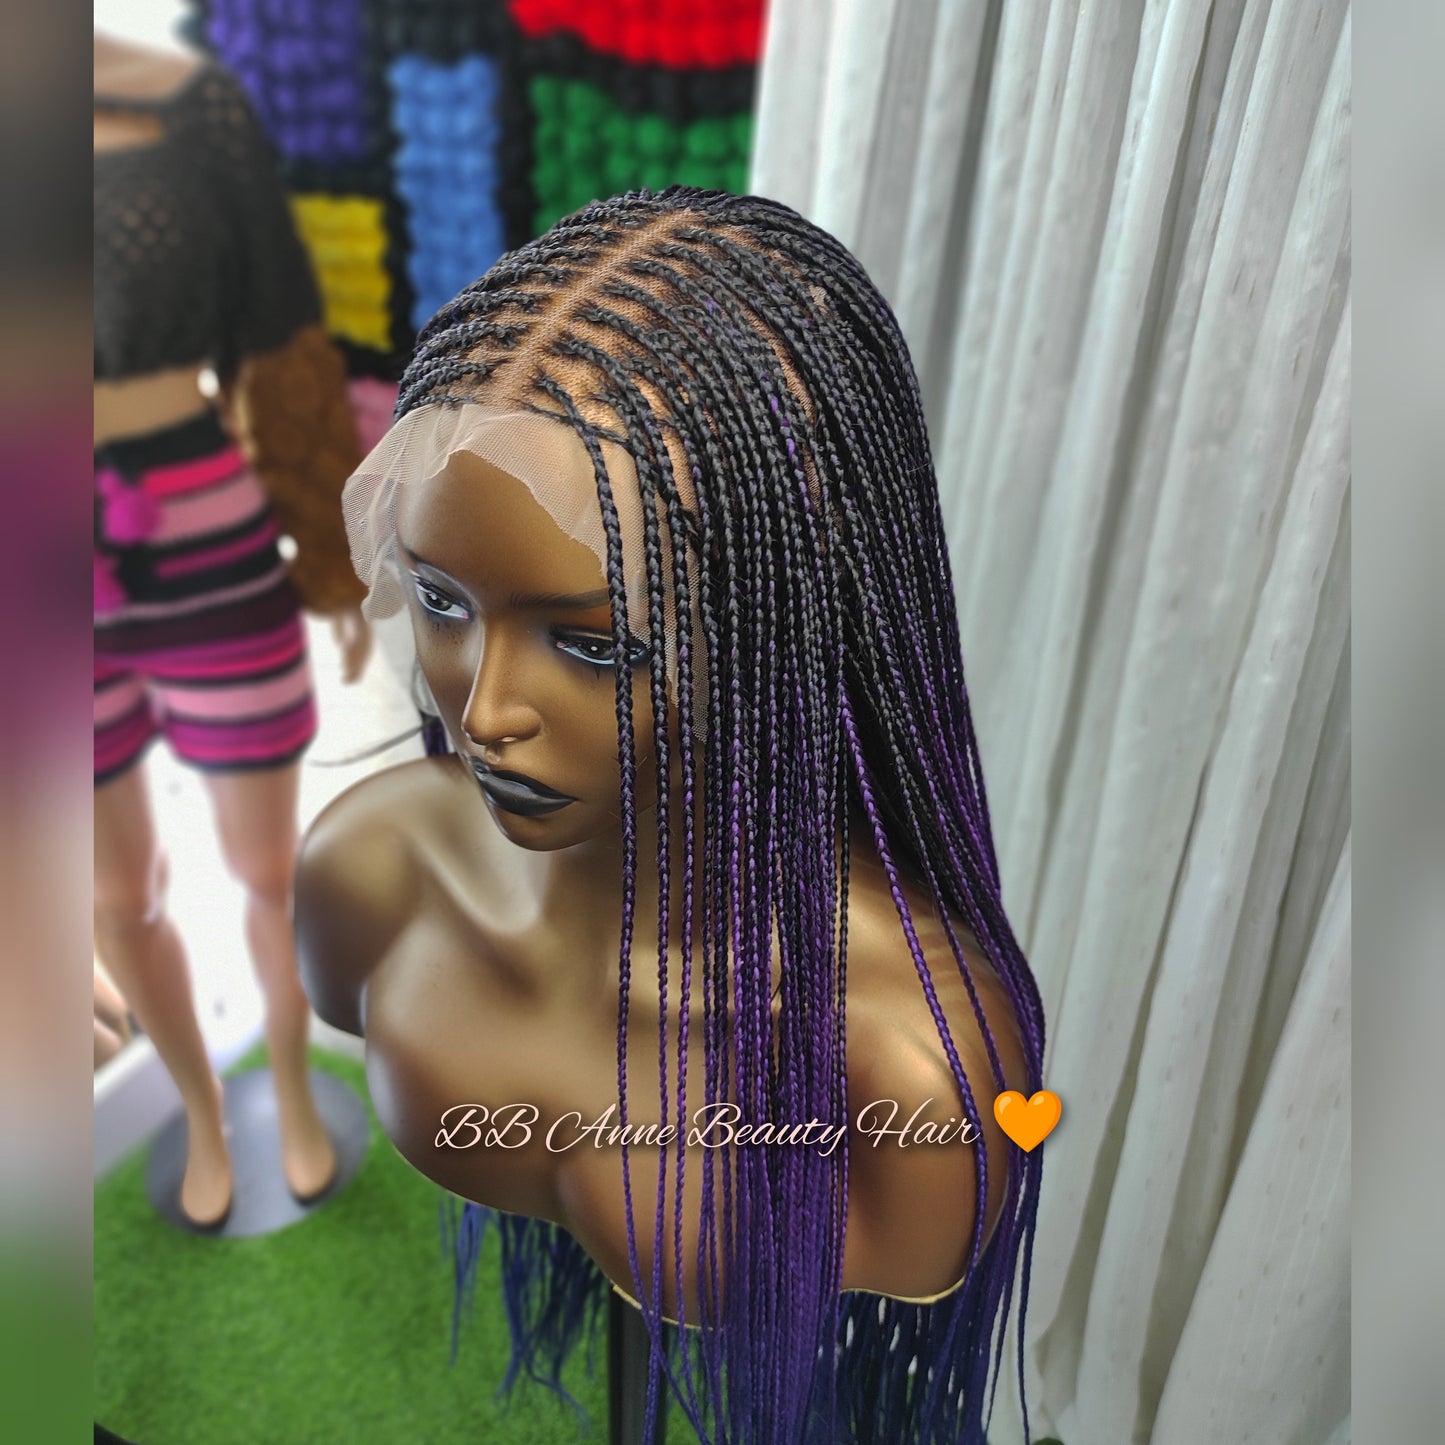 CASSIE | OMBRE Knotless | Full Lace Unit